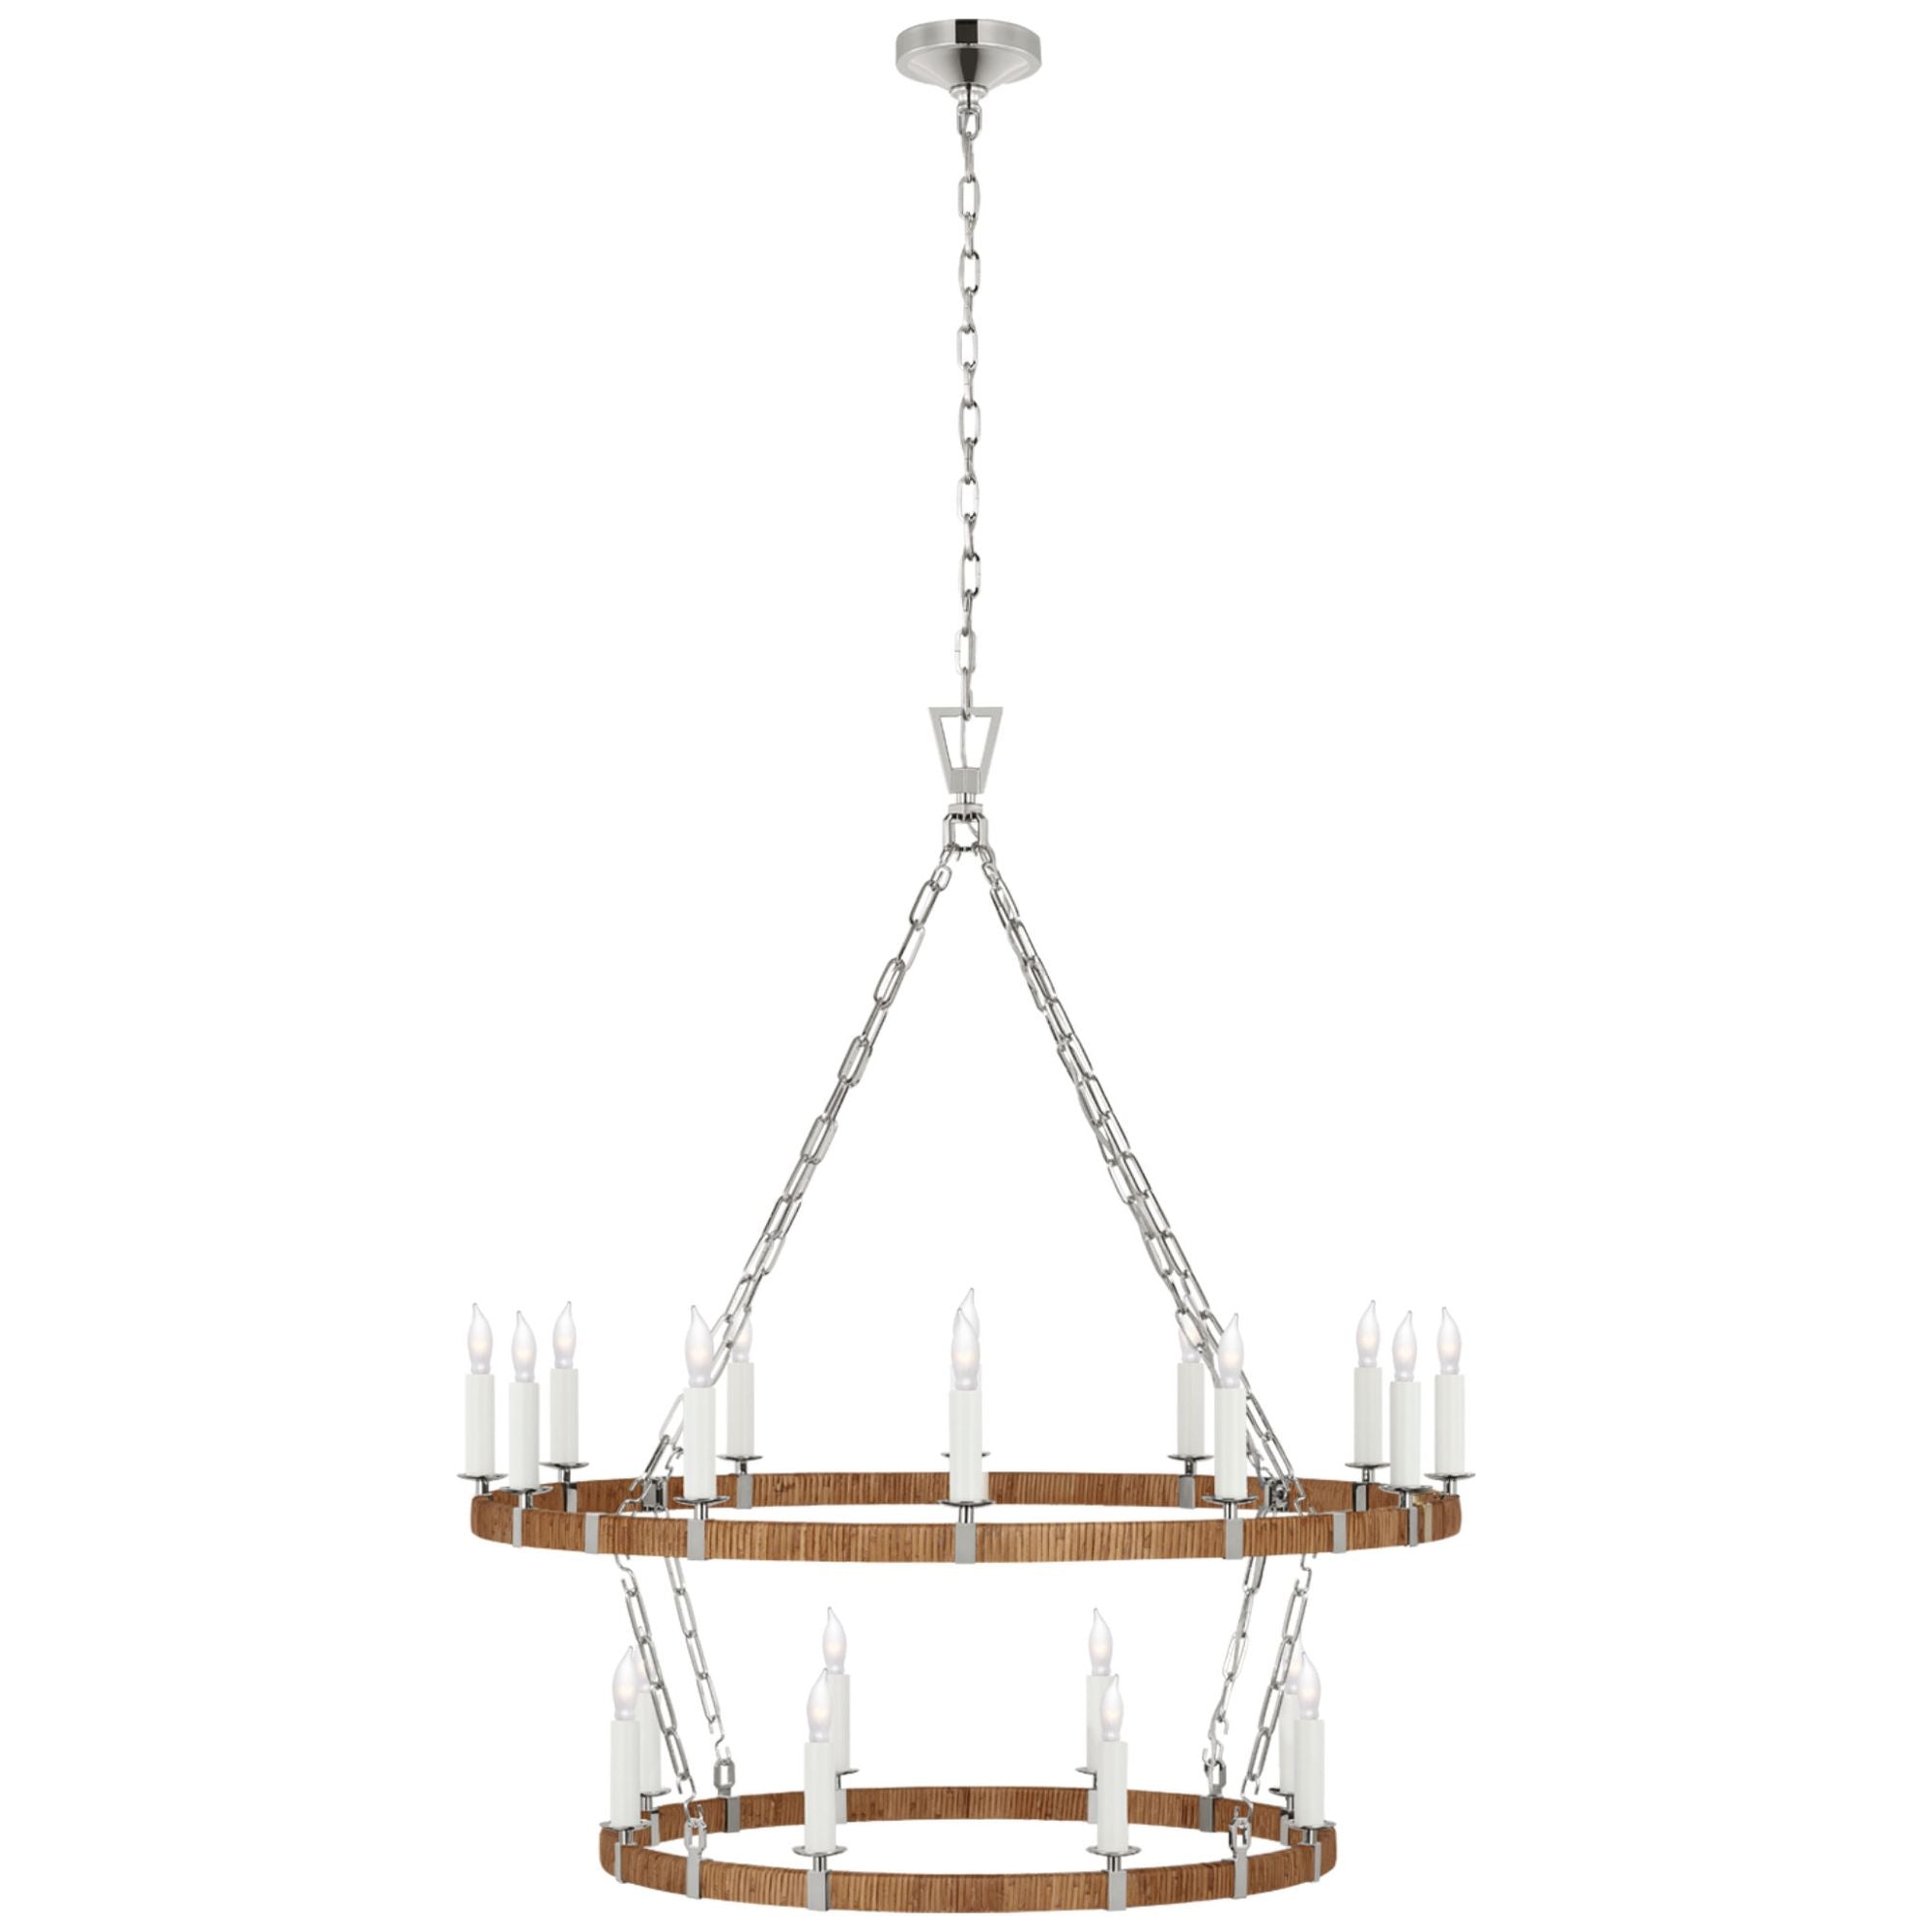 Chapman & Myers Darlana Large Two Tier Chandelier in Polished Nickel and Natural Rattan